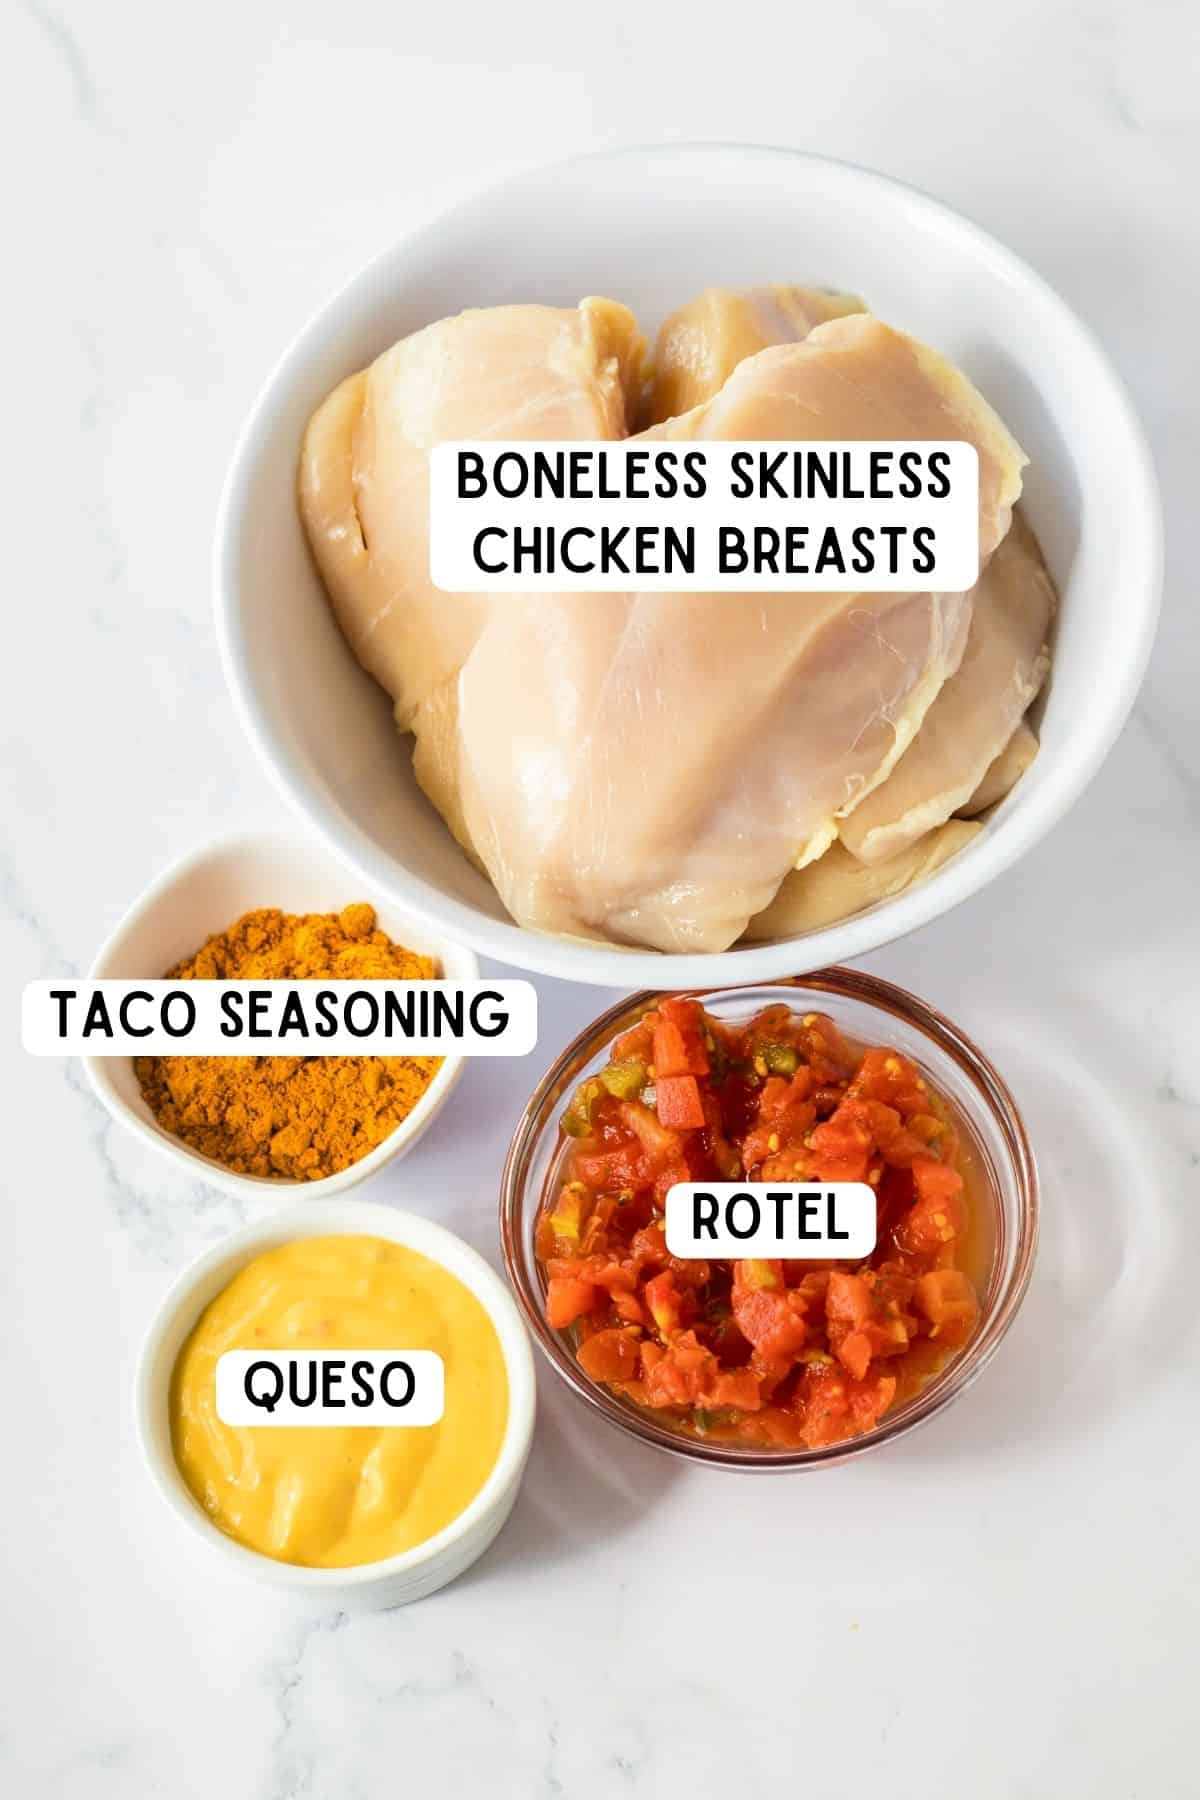 Boneless skinless chicken breasts, taco seasoning, rotel, and queso.